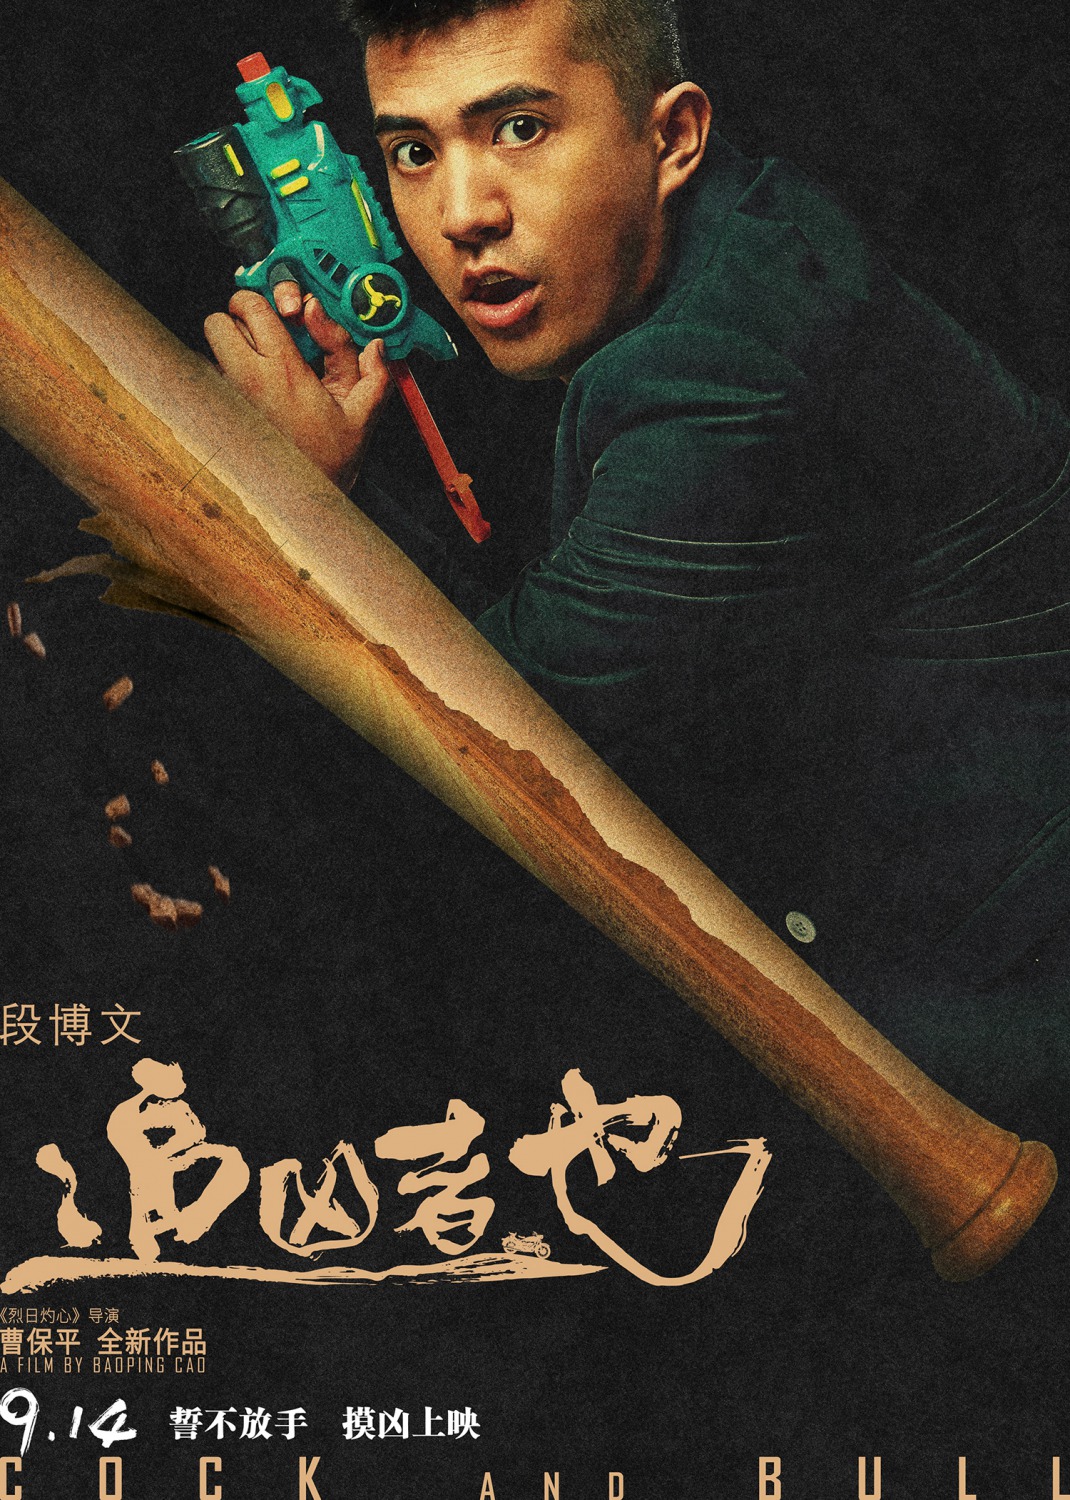 Extra Large Movie Poster Image for Zhui xiong zhe ye (#12 of 16)